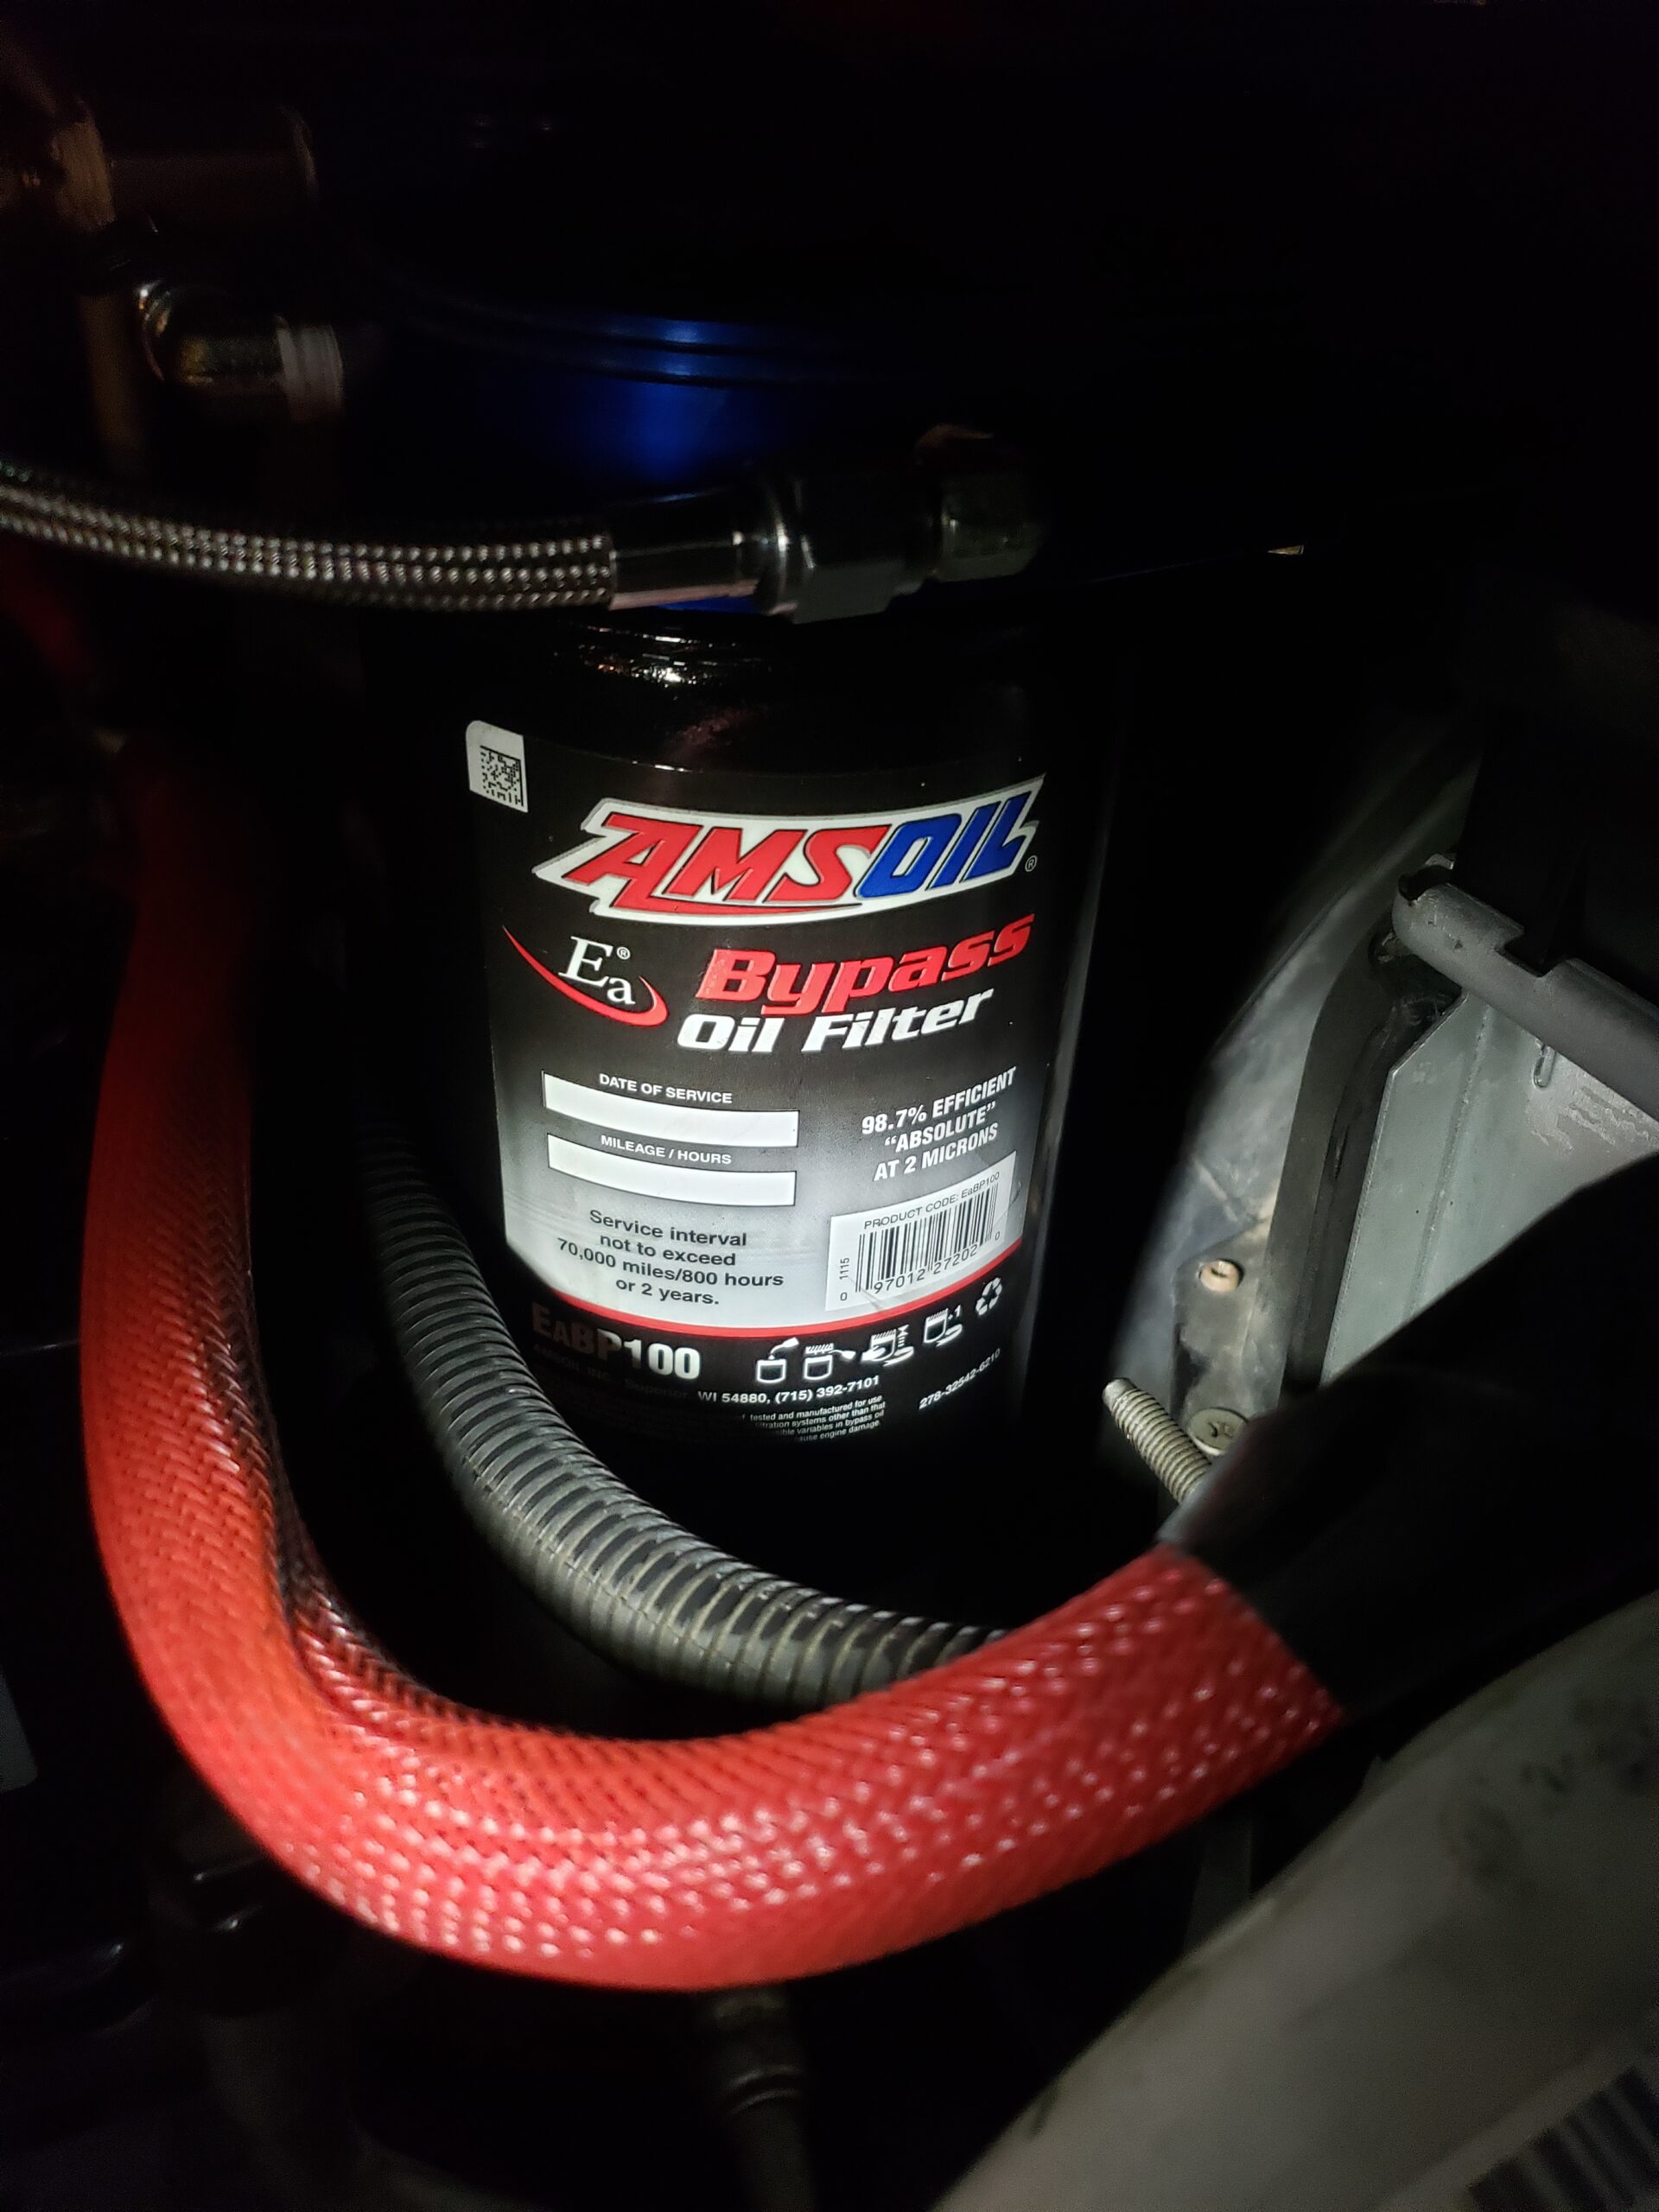 AMSOIL Best Bypass Oil Filter on a 6.0 Ford Powerstroke